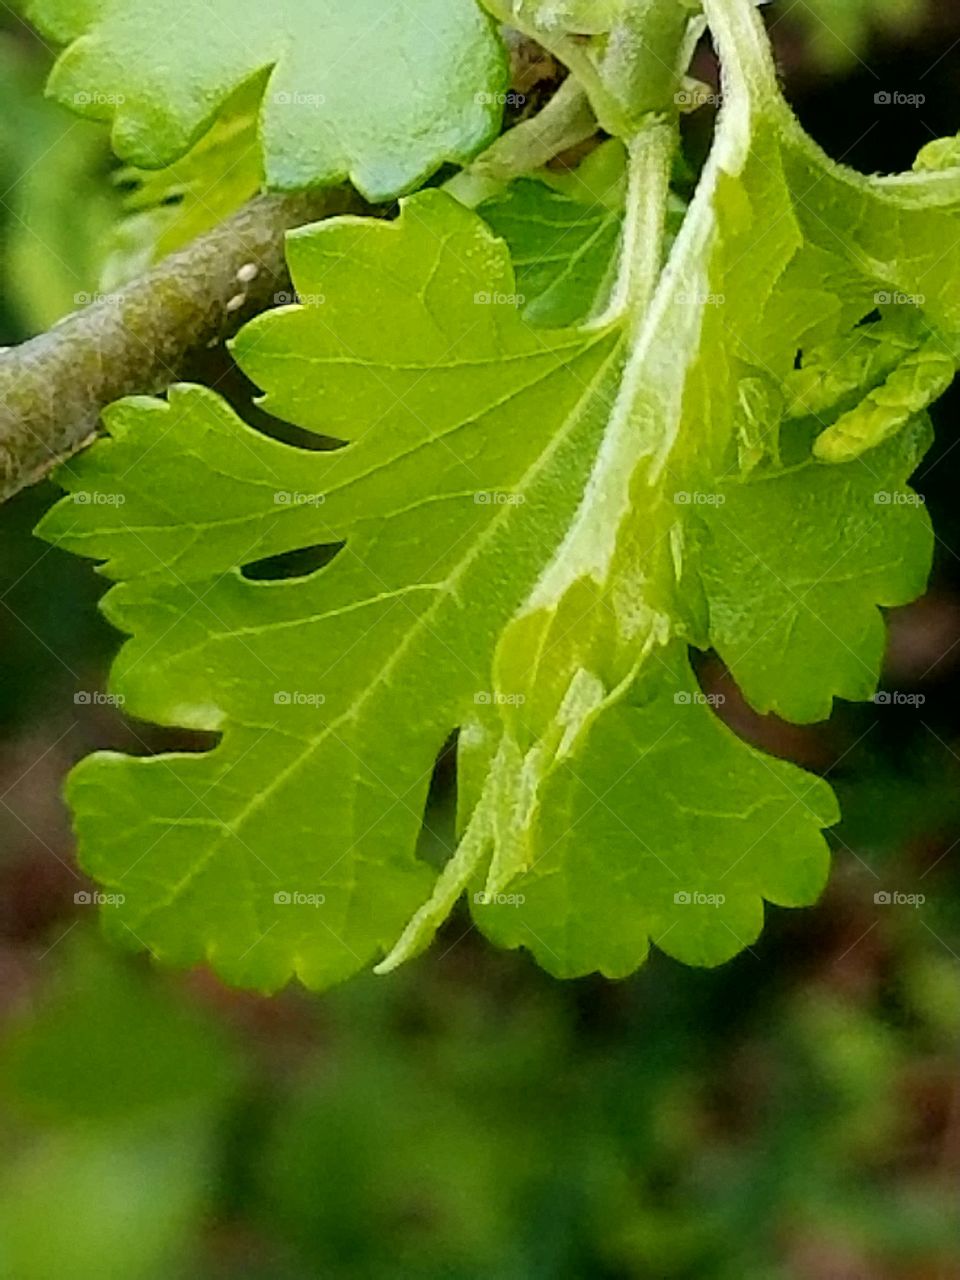 green leaf up close on a branch